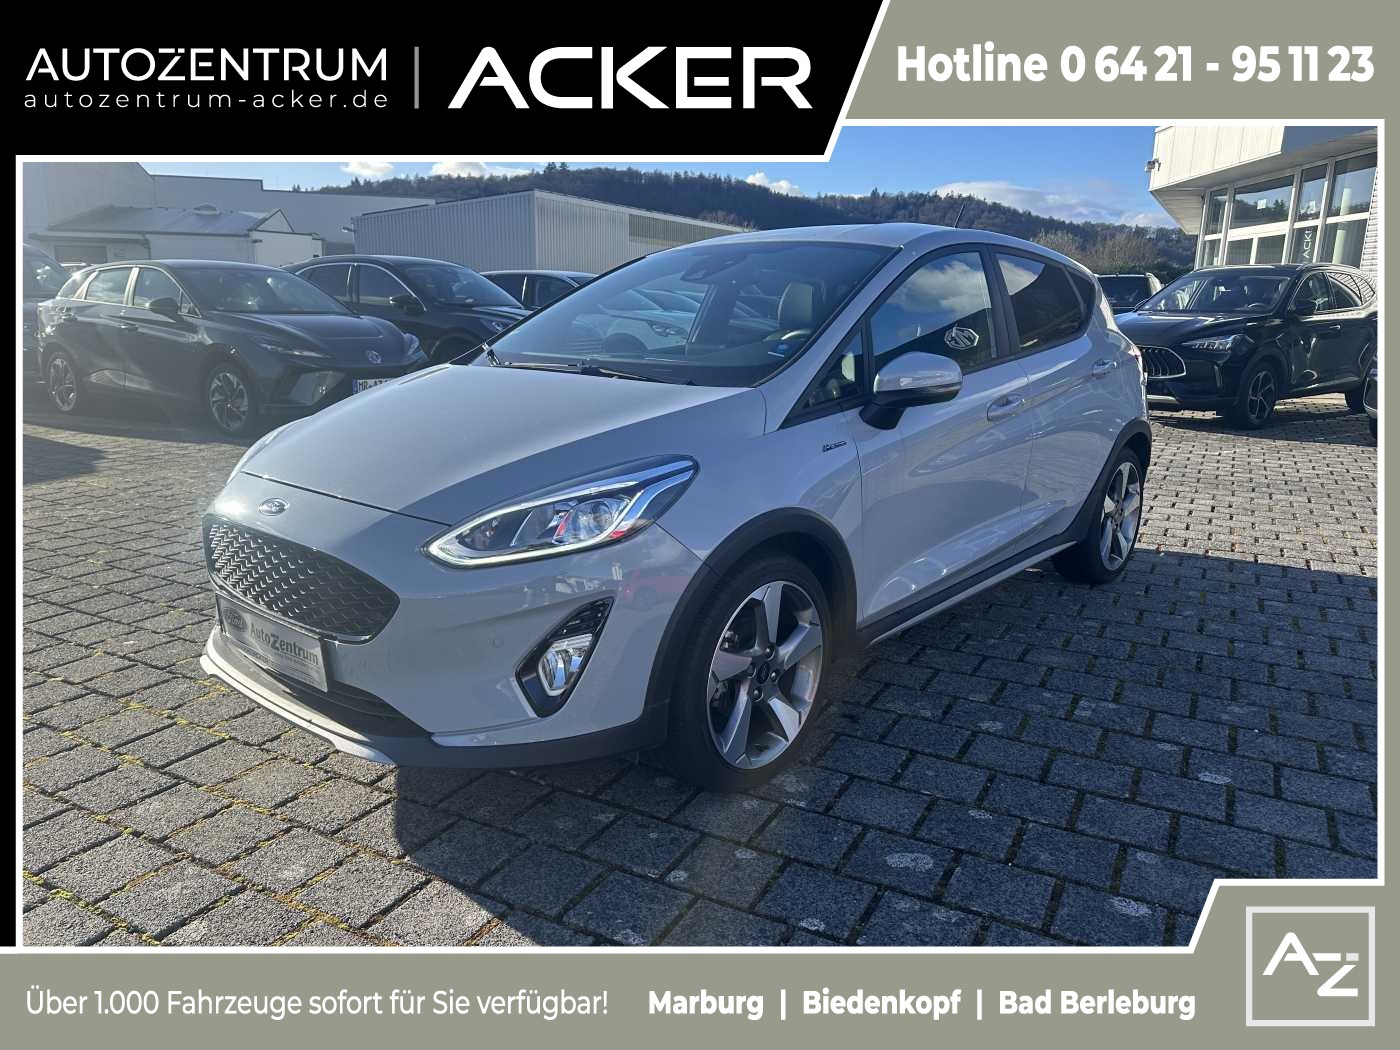 Ford Fiesta 1.0 EcoBoost Active Plus